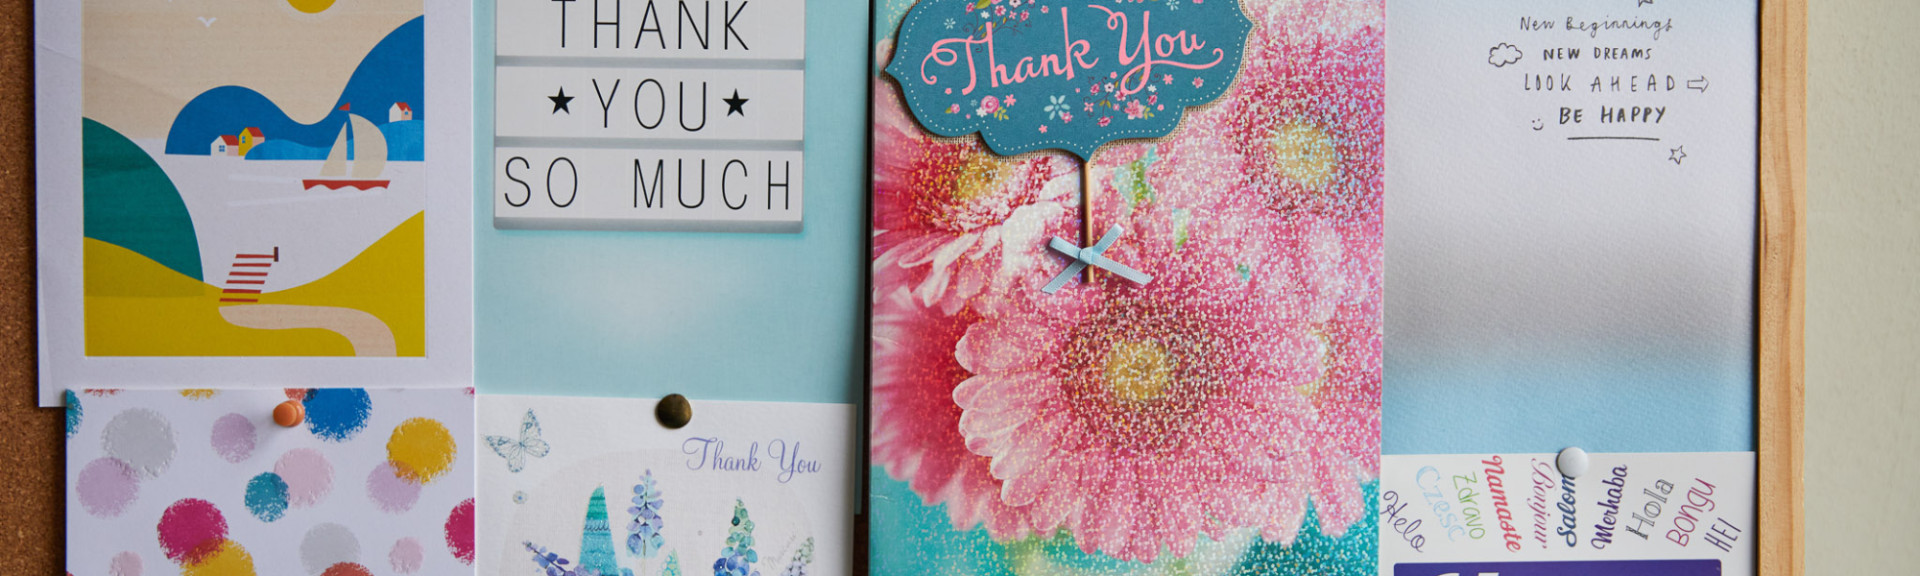 A phot showing a selection of thank you cards